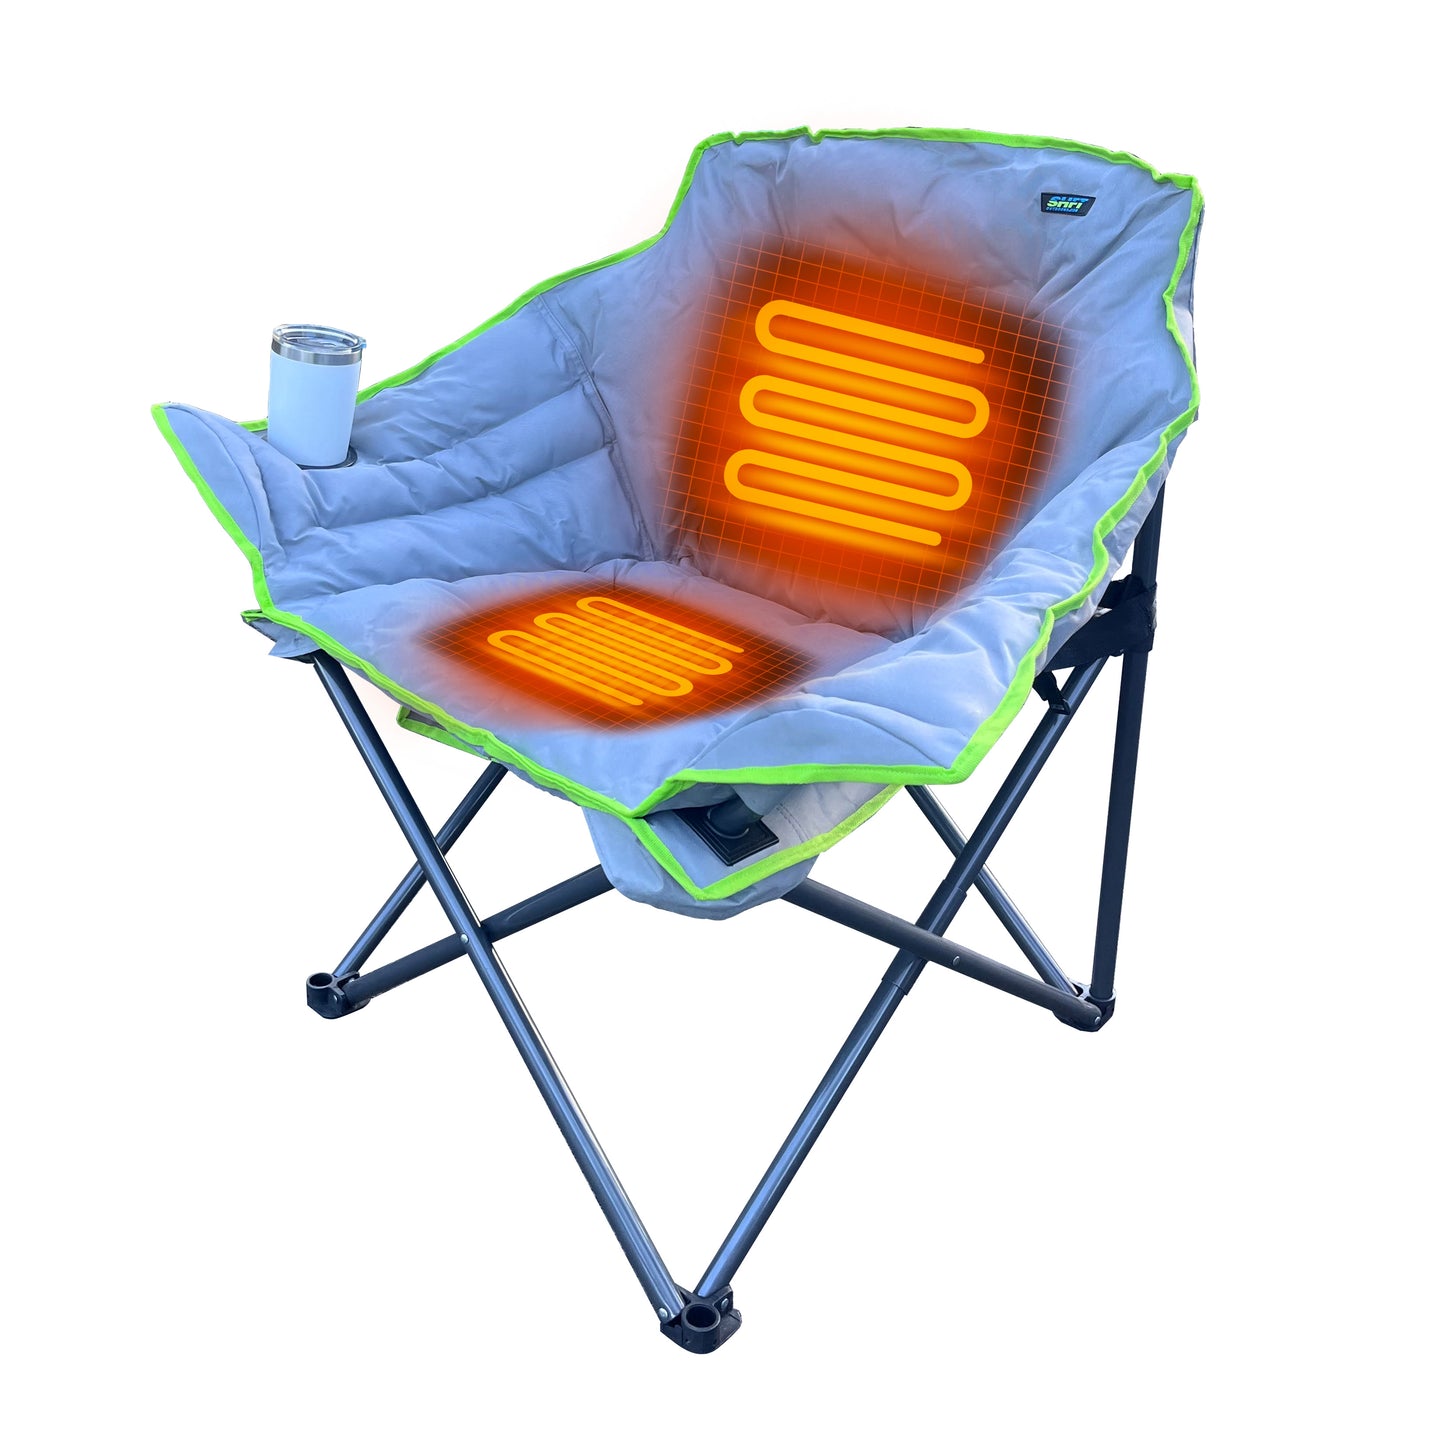 SHFT Heated Chair Powered by Energizer